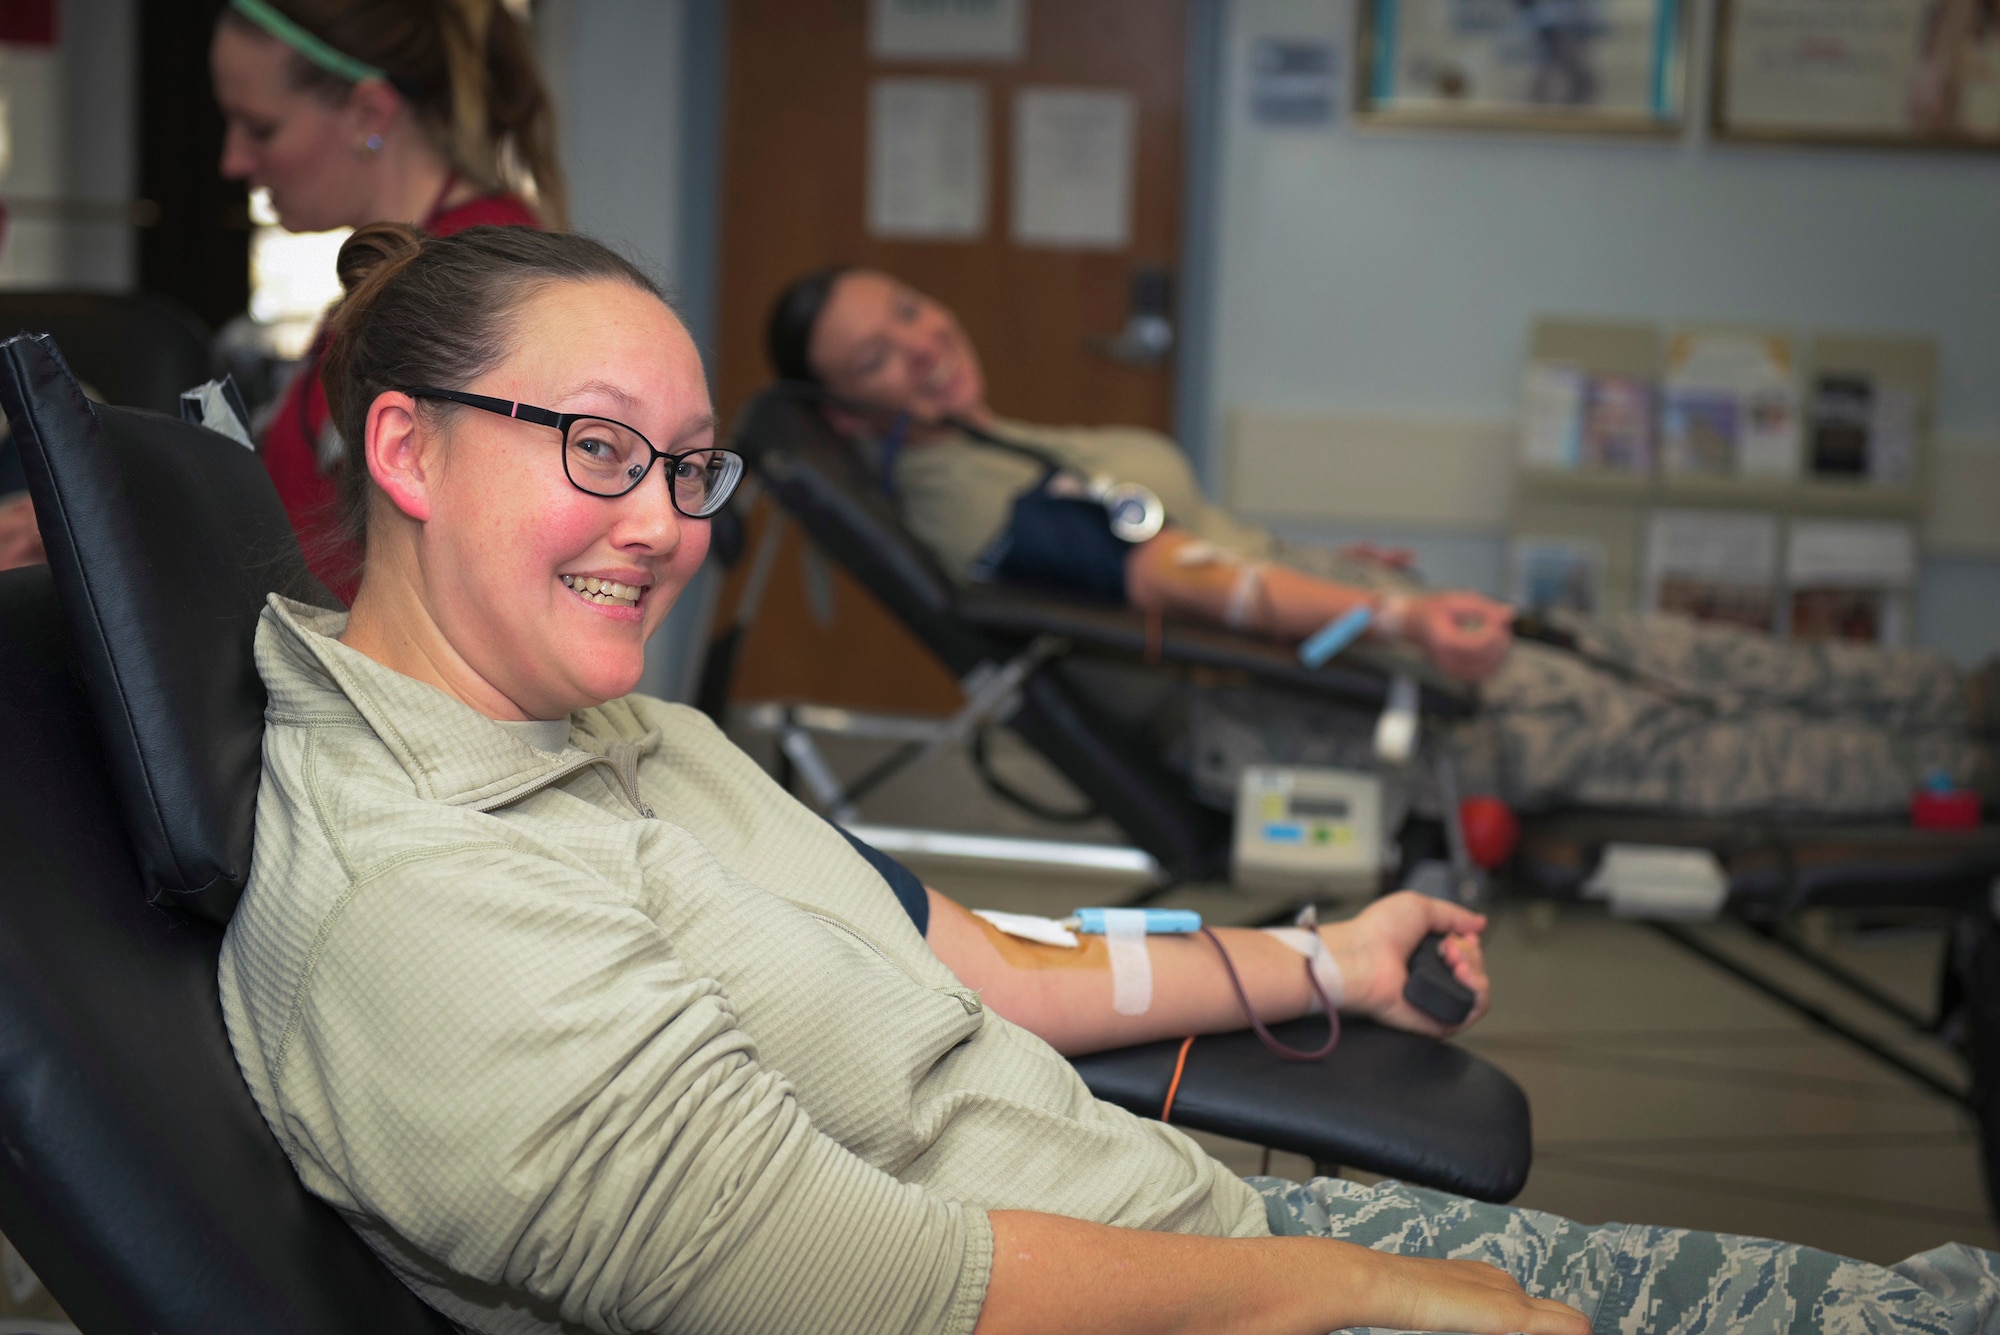 U.S. Air Force Master Sgt. Sara Corteville, a command post superintendent with the 182nd Airlift Wing, Illinois Air National Guard, and Tech. Sgt. Dawn Tavenner, background, the chief of information protection with the 182nd Security Forces Squadron, donate blood at an American Red Cross blood drive in Peoria, Ill., Dec. 14, 2016. The wing’s company grade officers council hosted the event as a way for unit members to give back to their communities. (U.S. Air National Guard photo by Tech. Sgt. Lealan Buehrer)